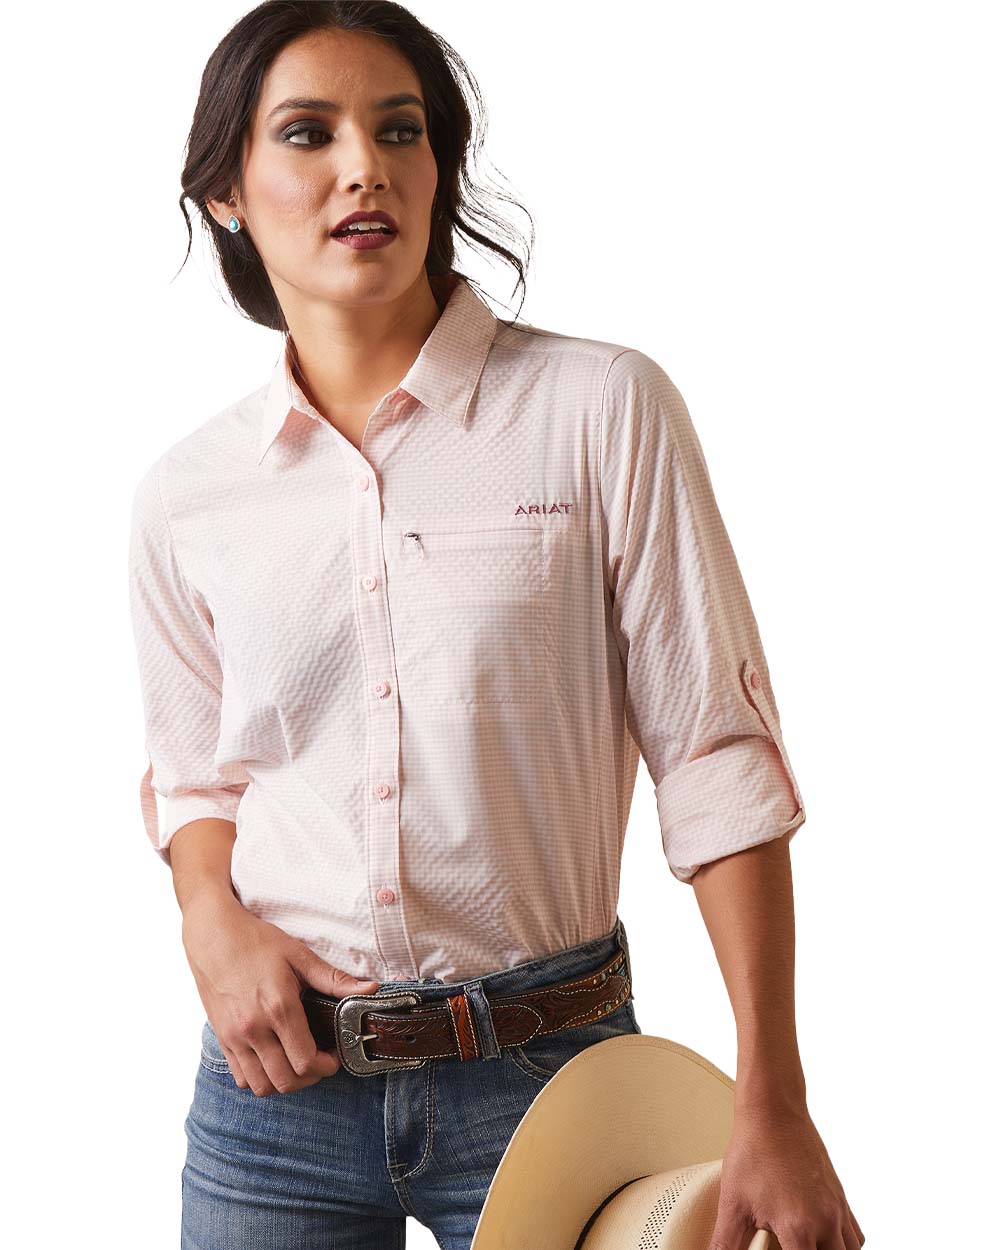 Coral Blush/White Check Ariat Womens VentTEK Stretch Long Sleeve Shirt on White background 